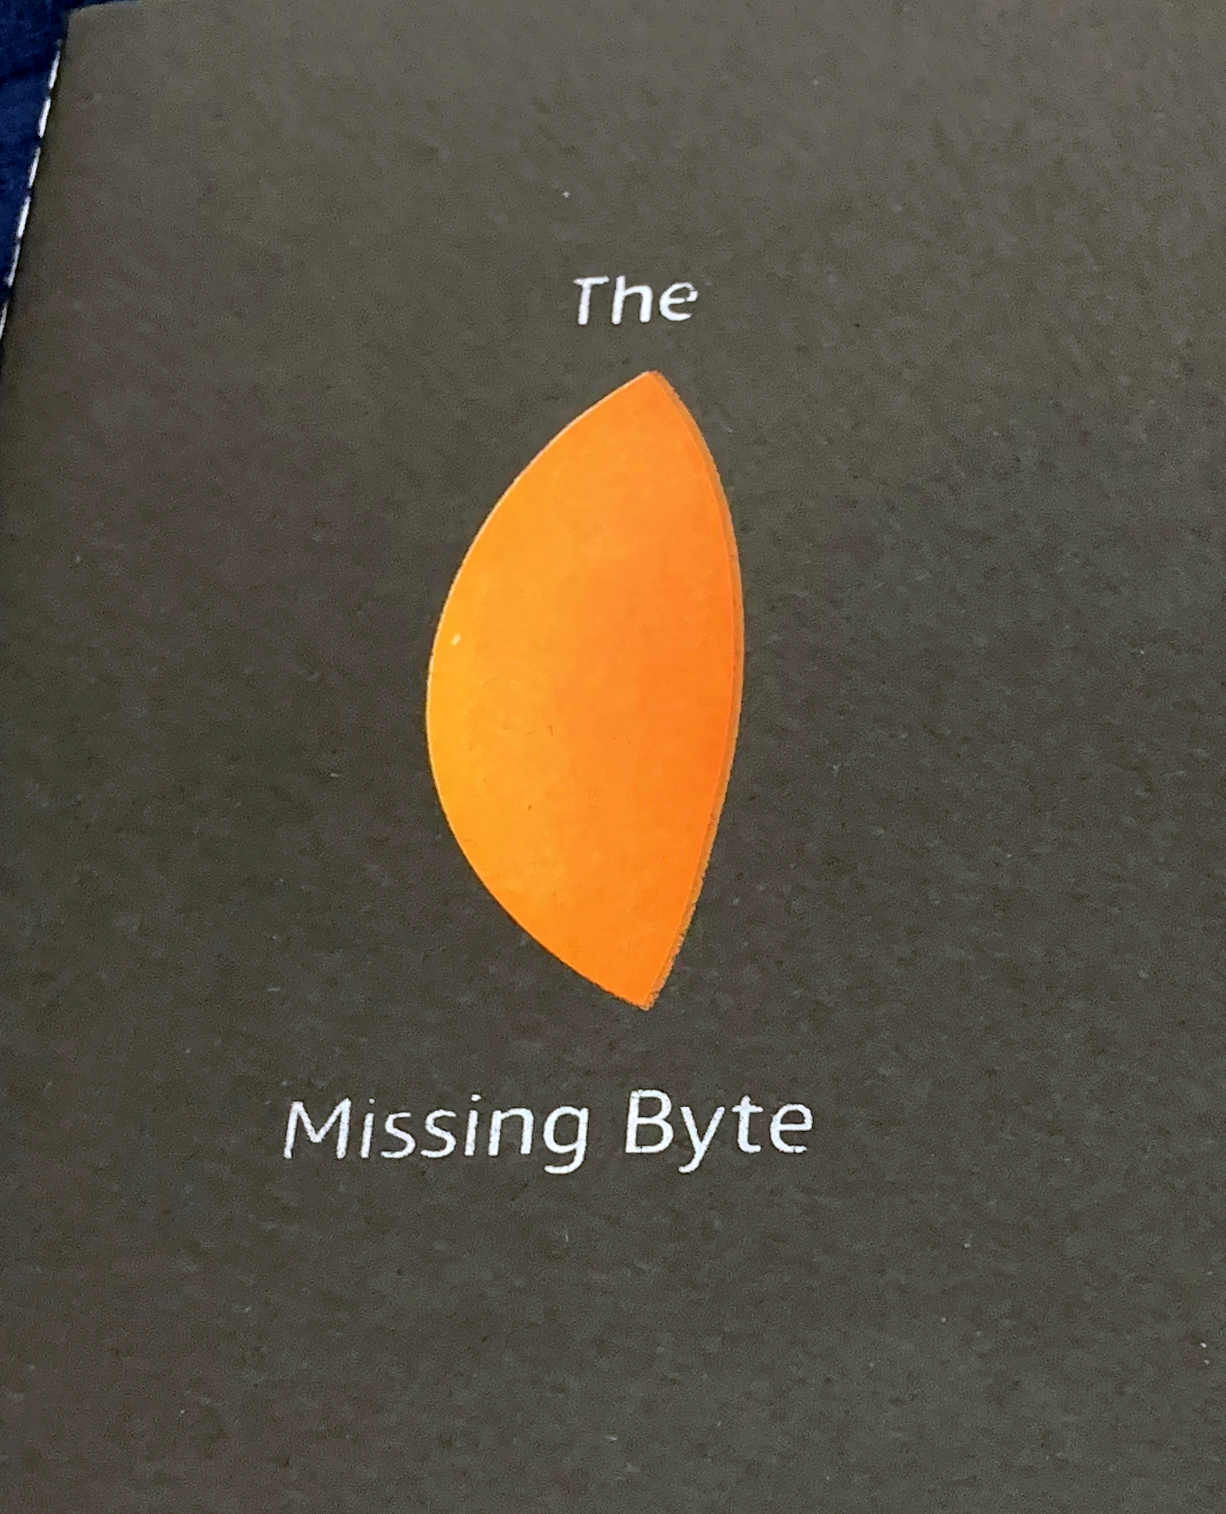 Screen printed logo: 'The Missing Byte' in thin typography and a half-moon-like shape with a subtle orange gradient